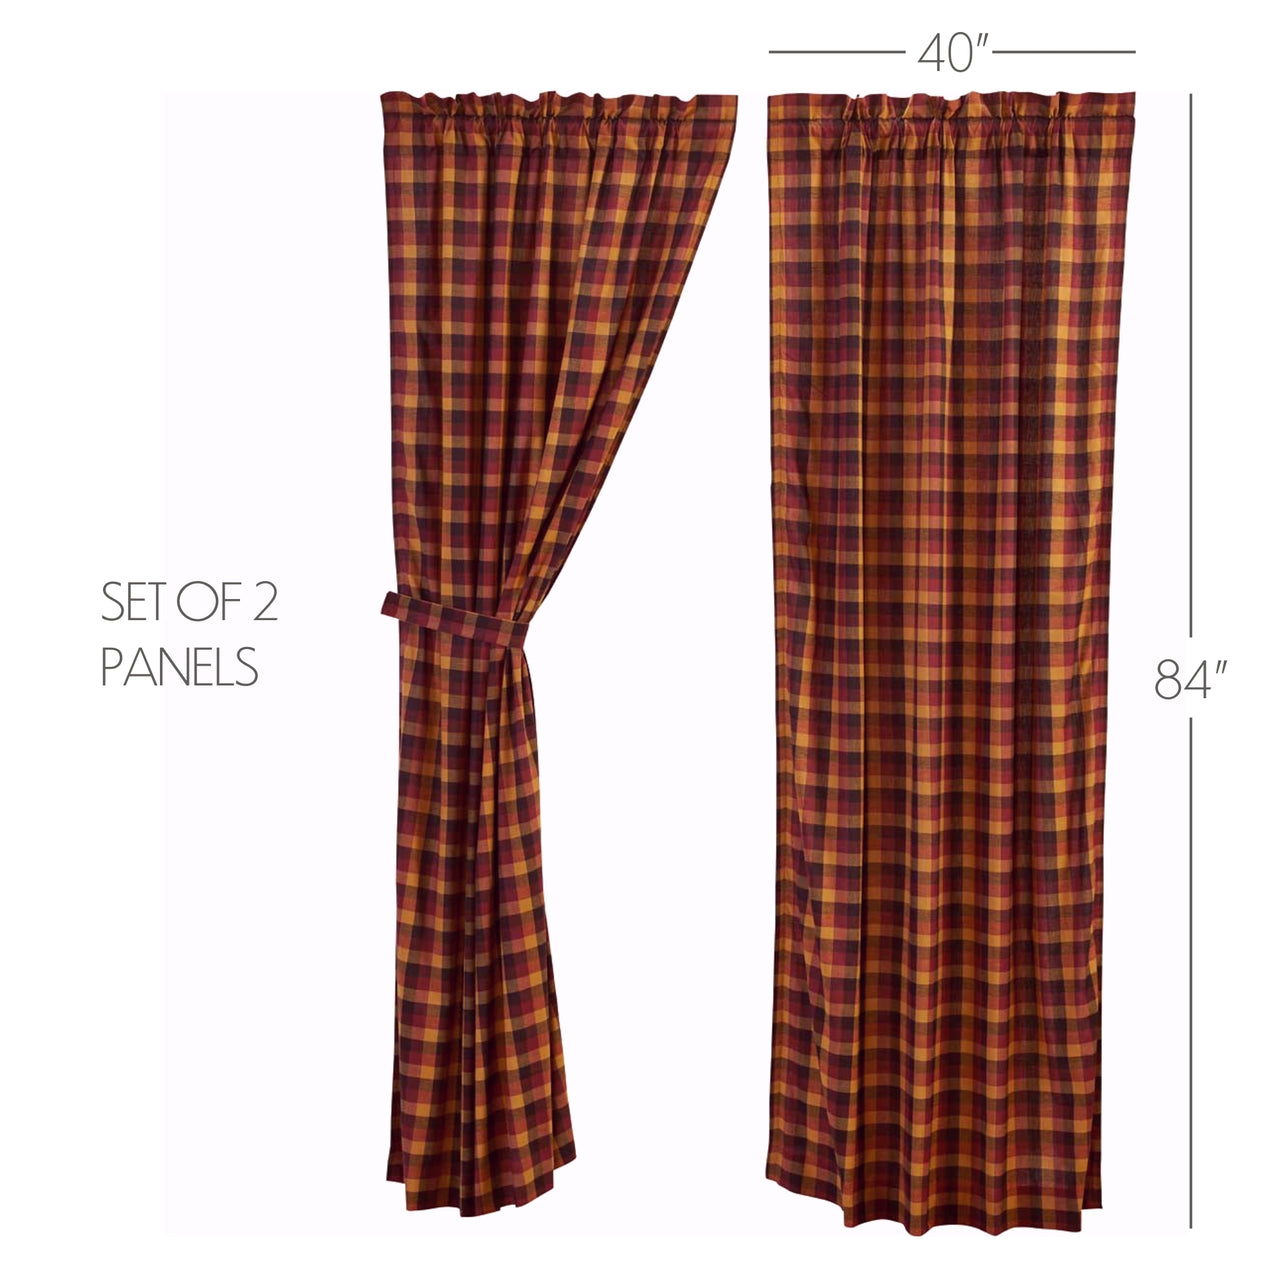 Heritage Farms Primitive Check Curtain Set of 2 84x40 VHC Brands